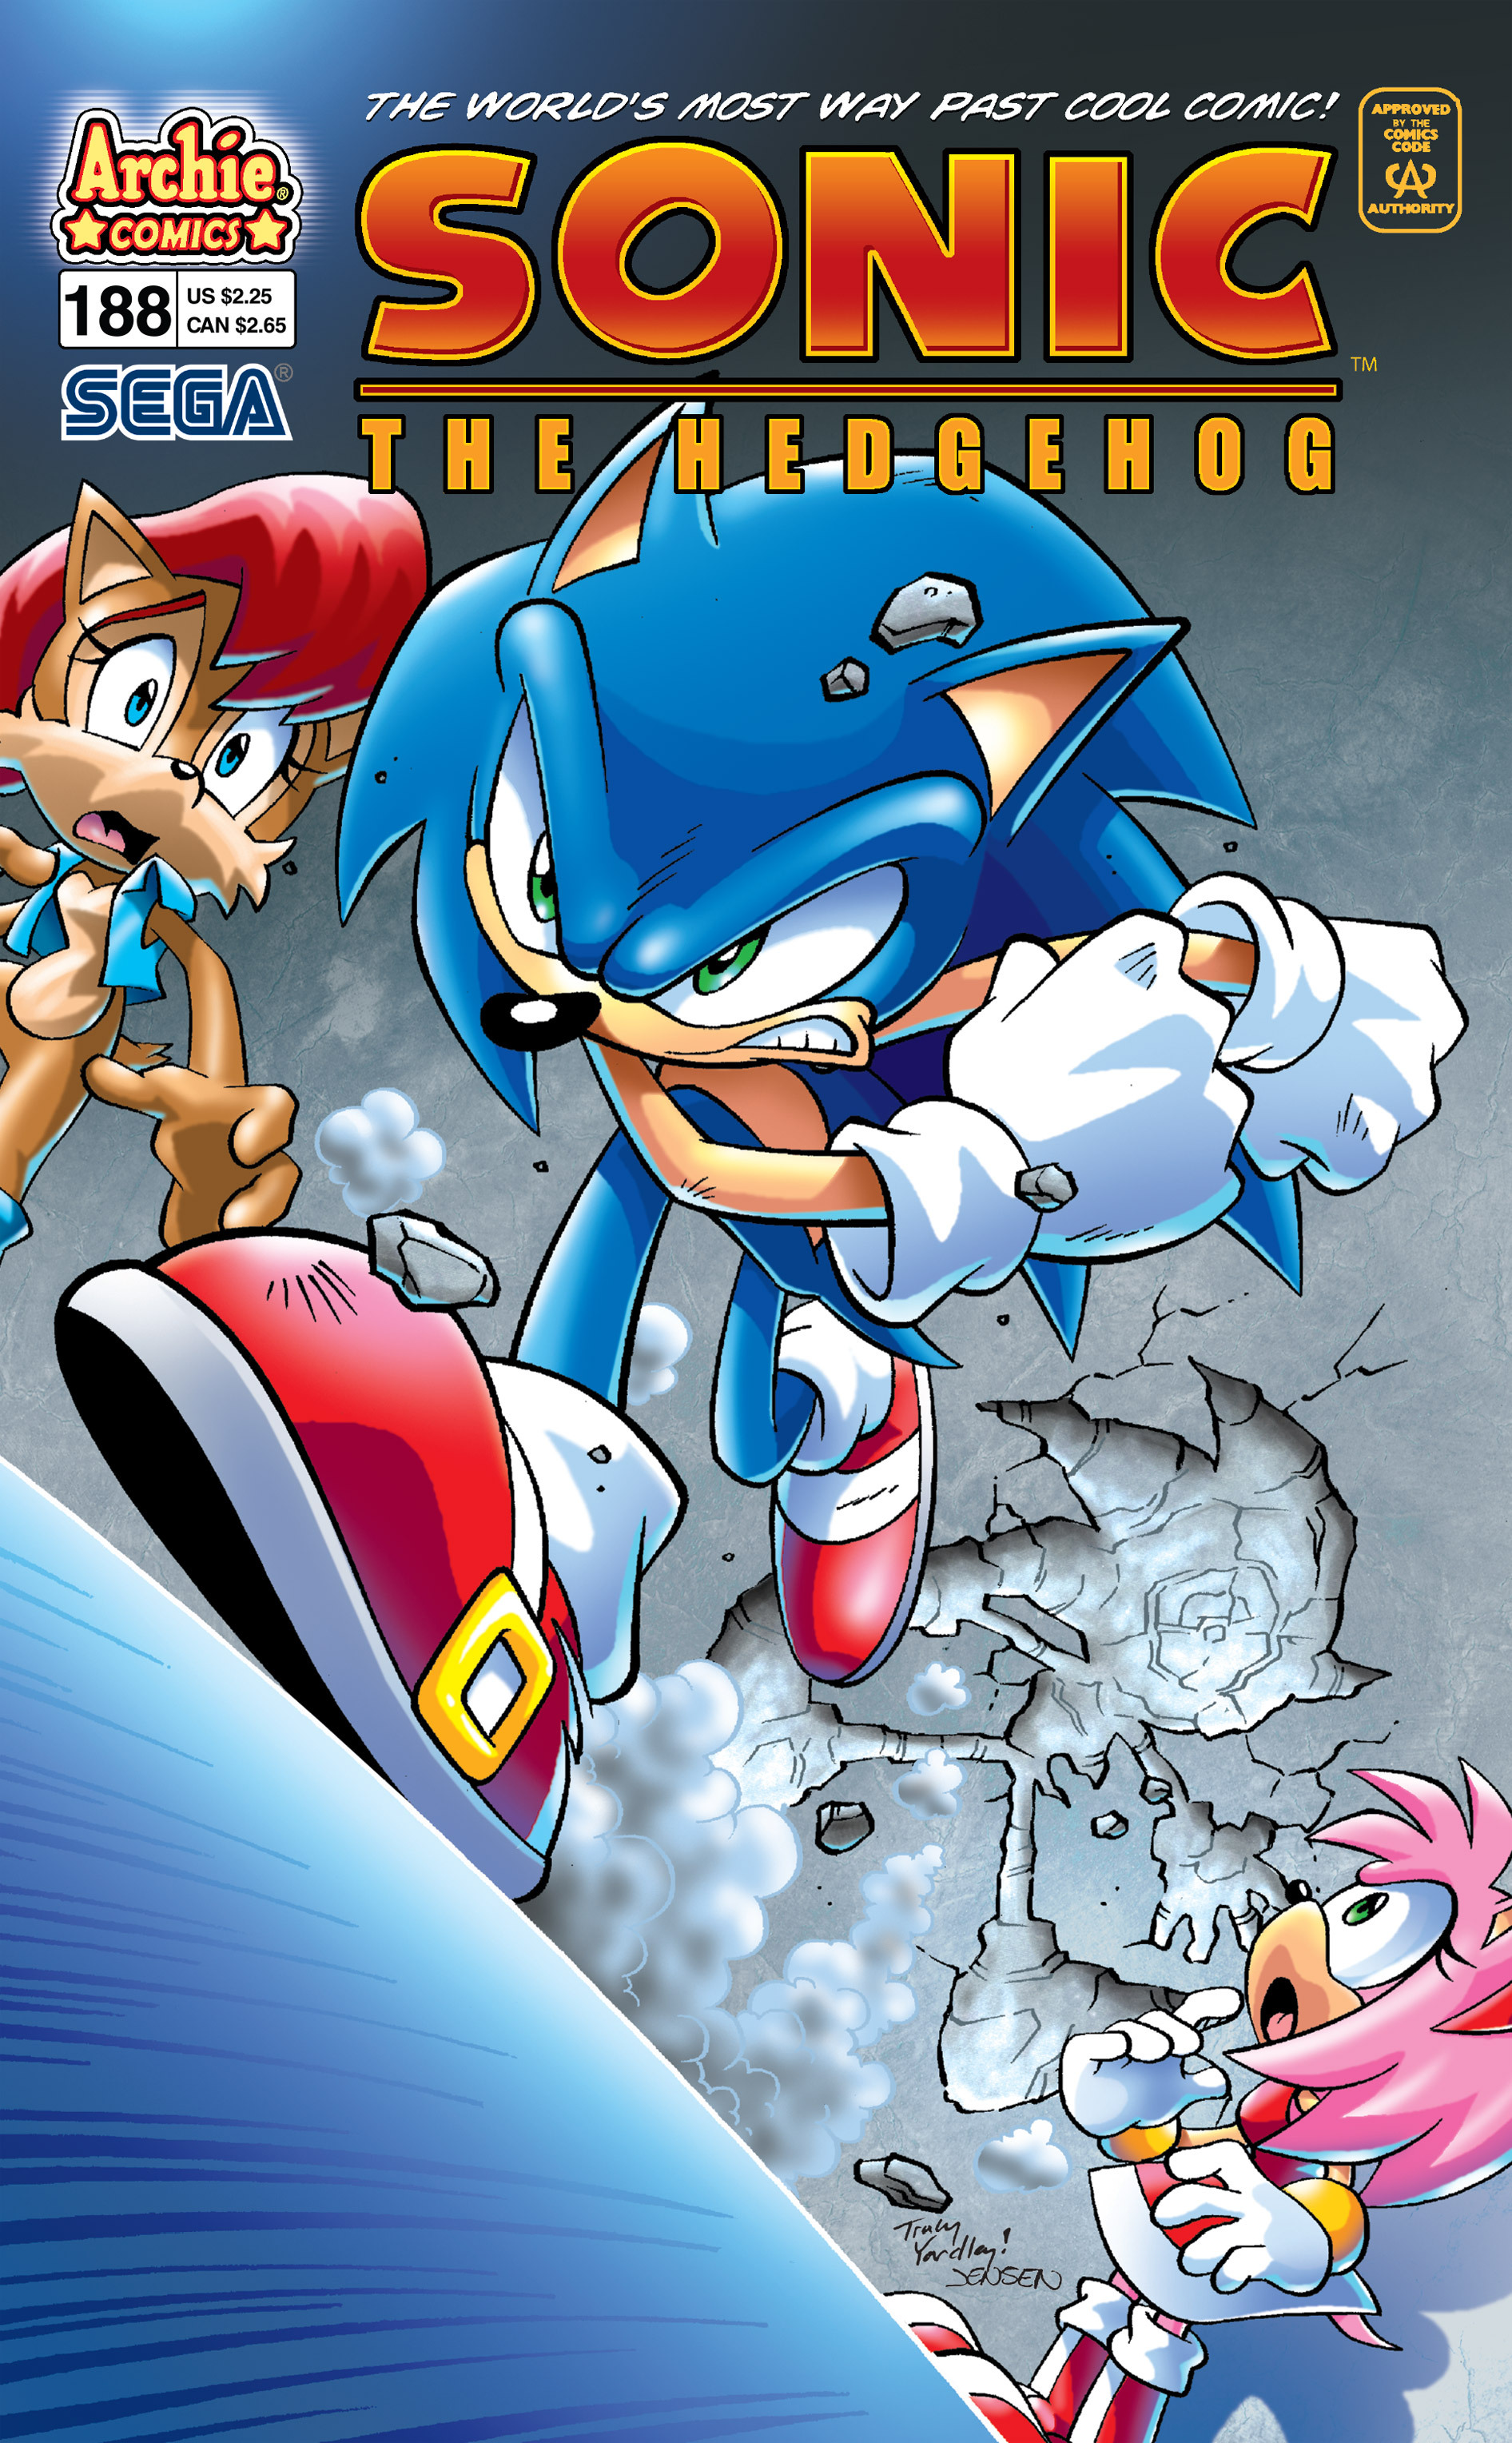 Archie Sonic the Hedgehog Issue 188 | Sonic News Network | FANDOM powered by Wikia